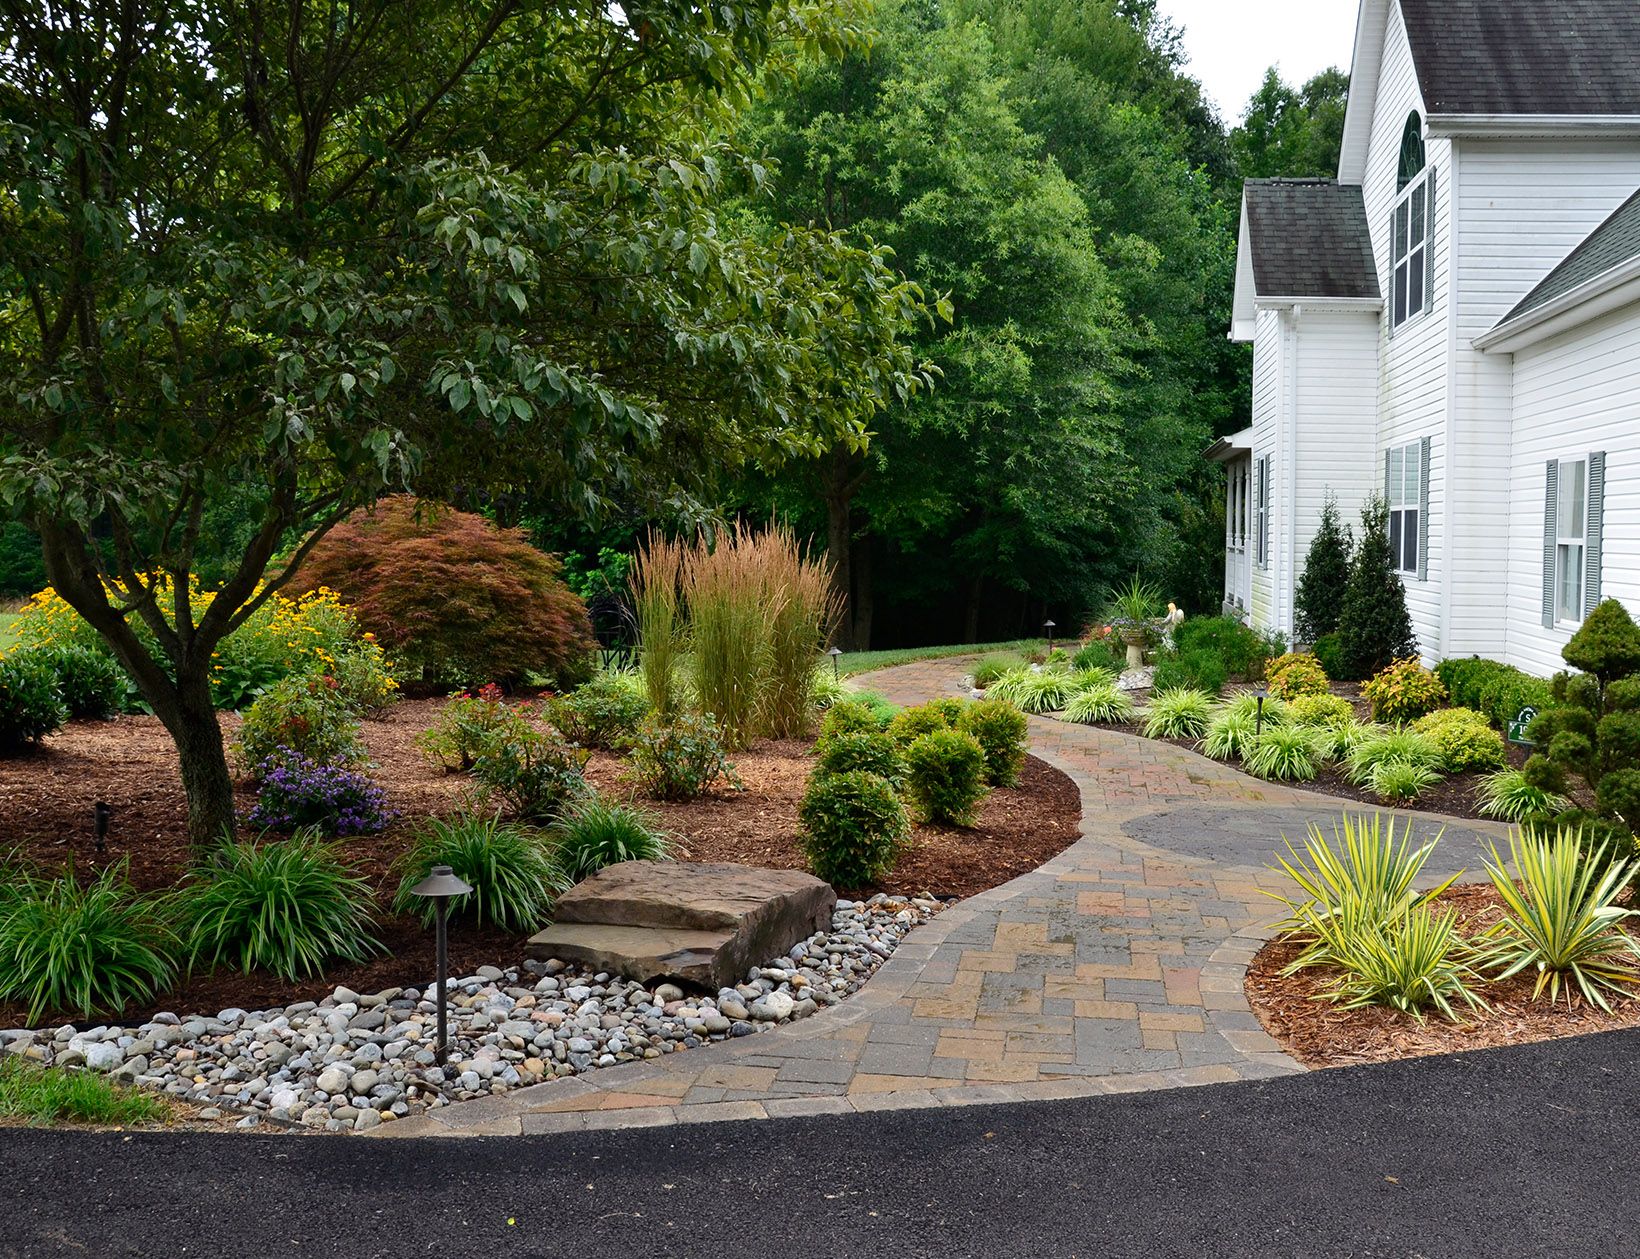 10 Easy Ways to Improve Curb Appeal